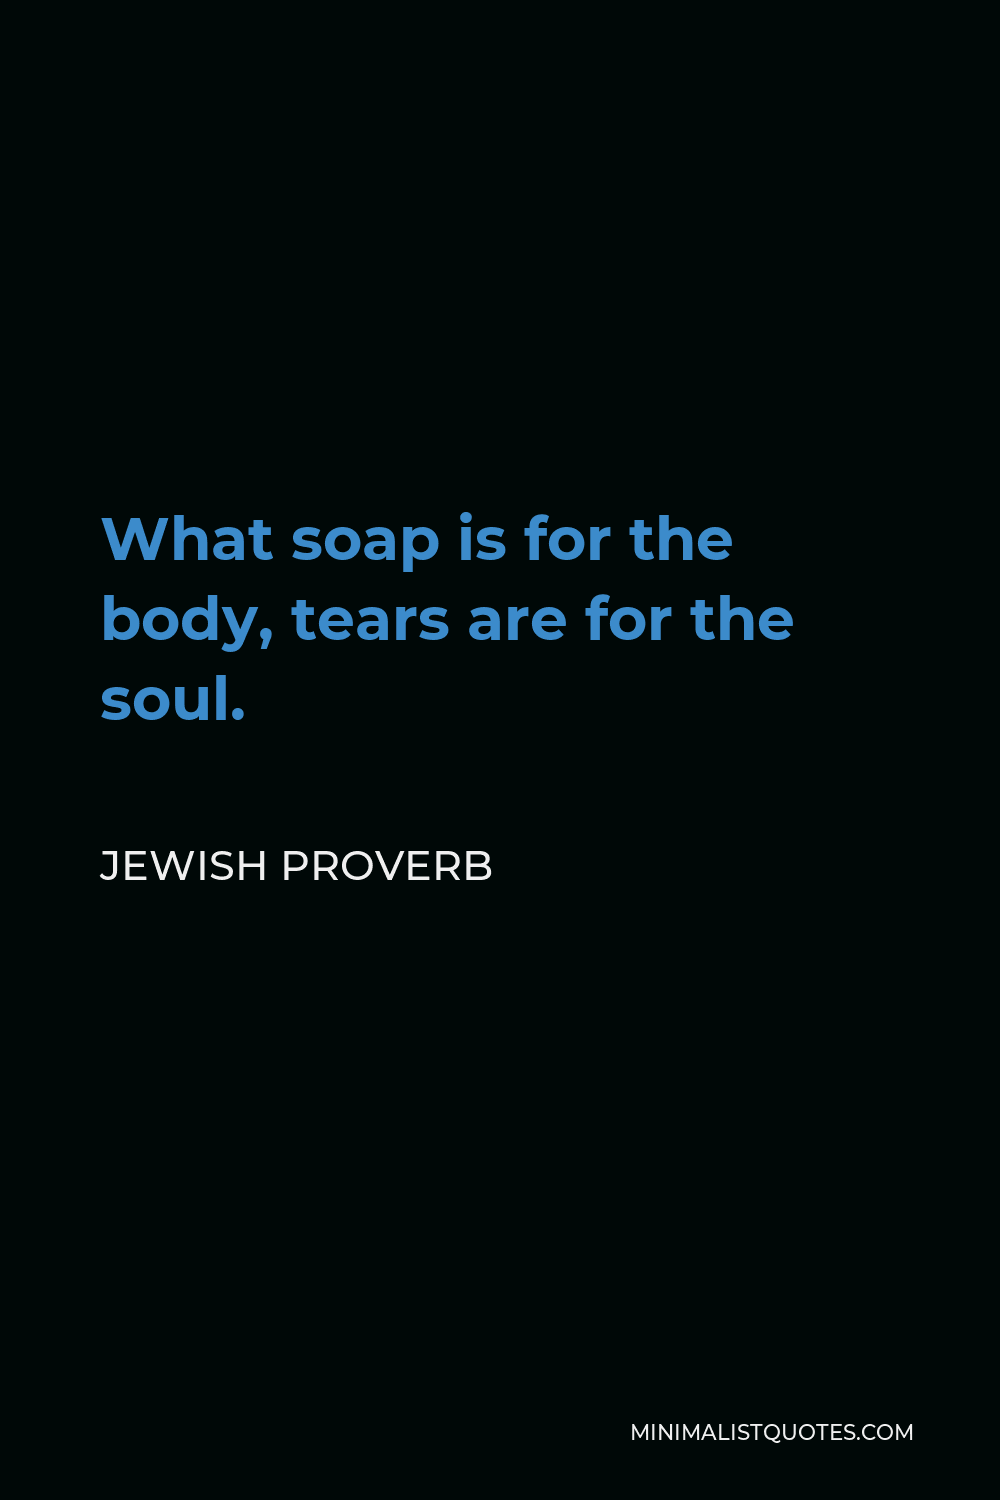 Jewish Proverb Quote - What soap is for the body, tears are for the soul.